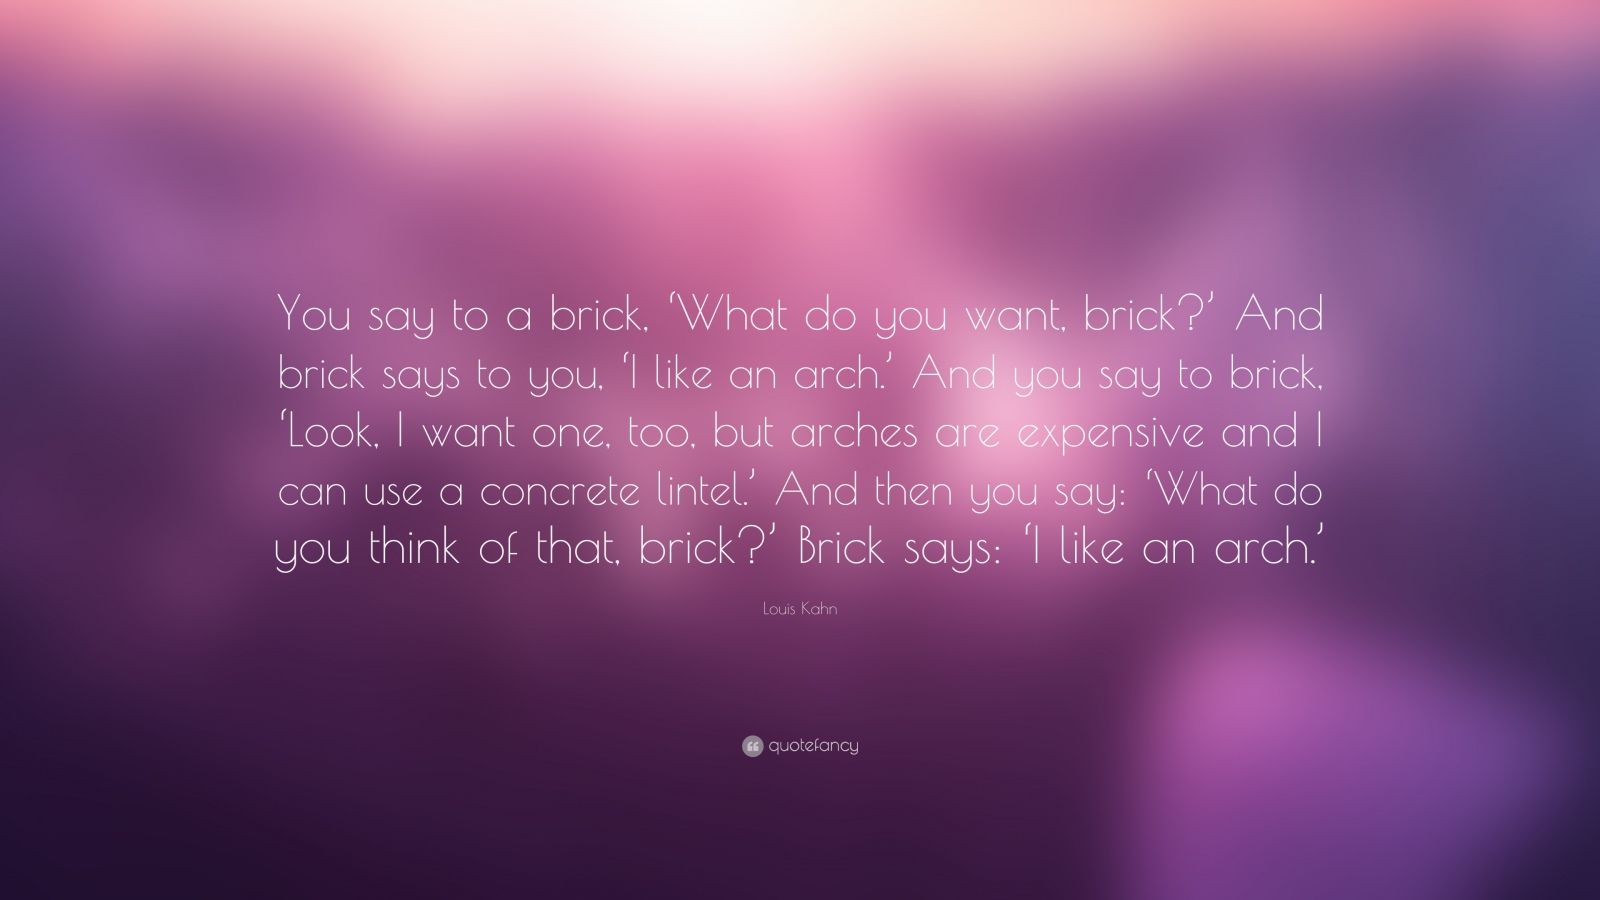 https://quotefancy.com/media/wallpaper/1600x900/974849-Louis-Kahn-Quote-You-say-to-a-brick-What-do-you-want-brick-And.jpg